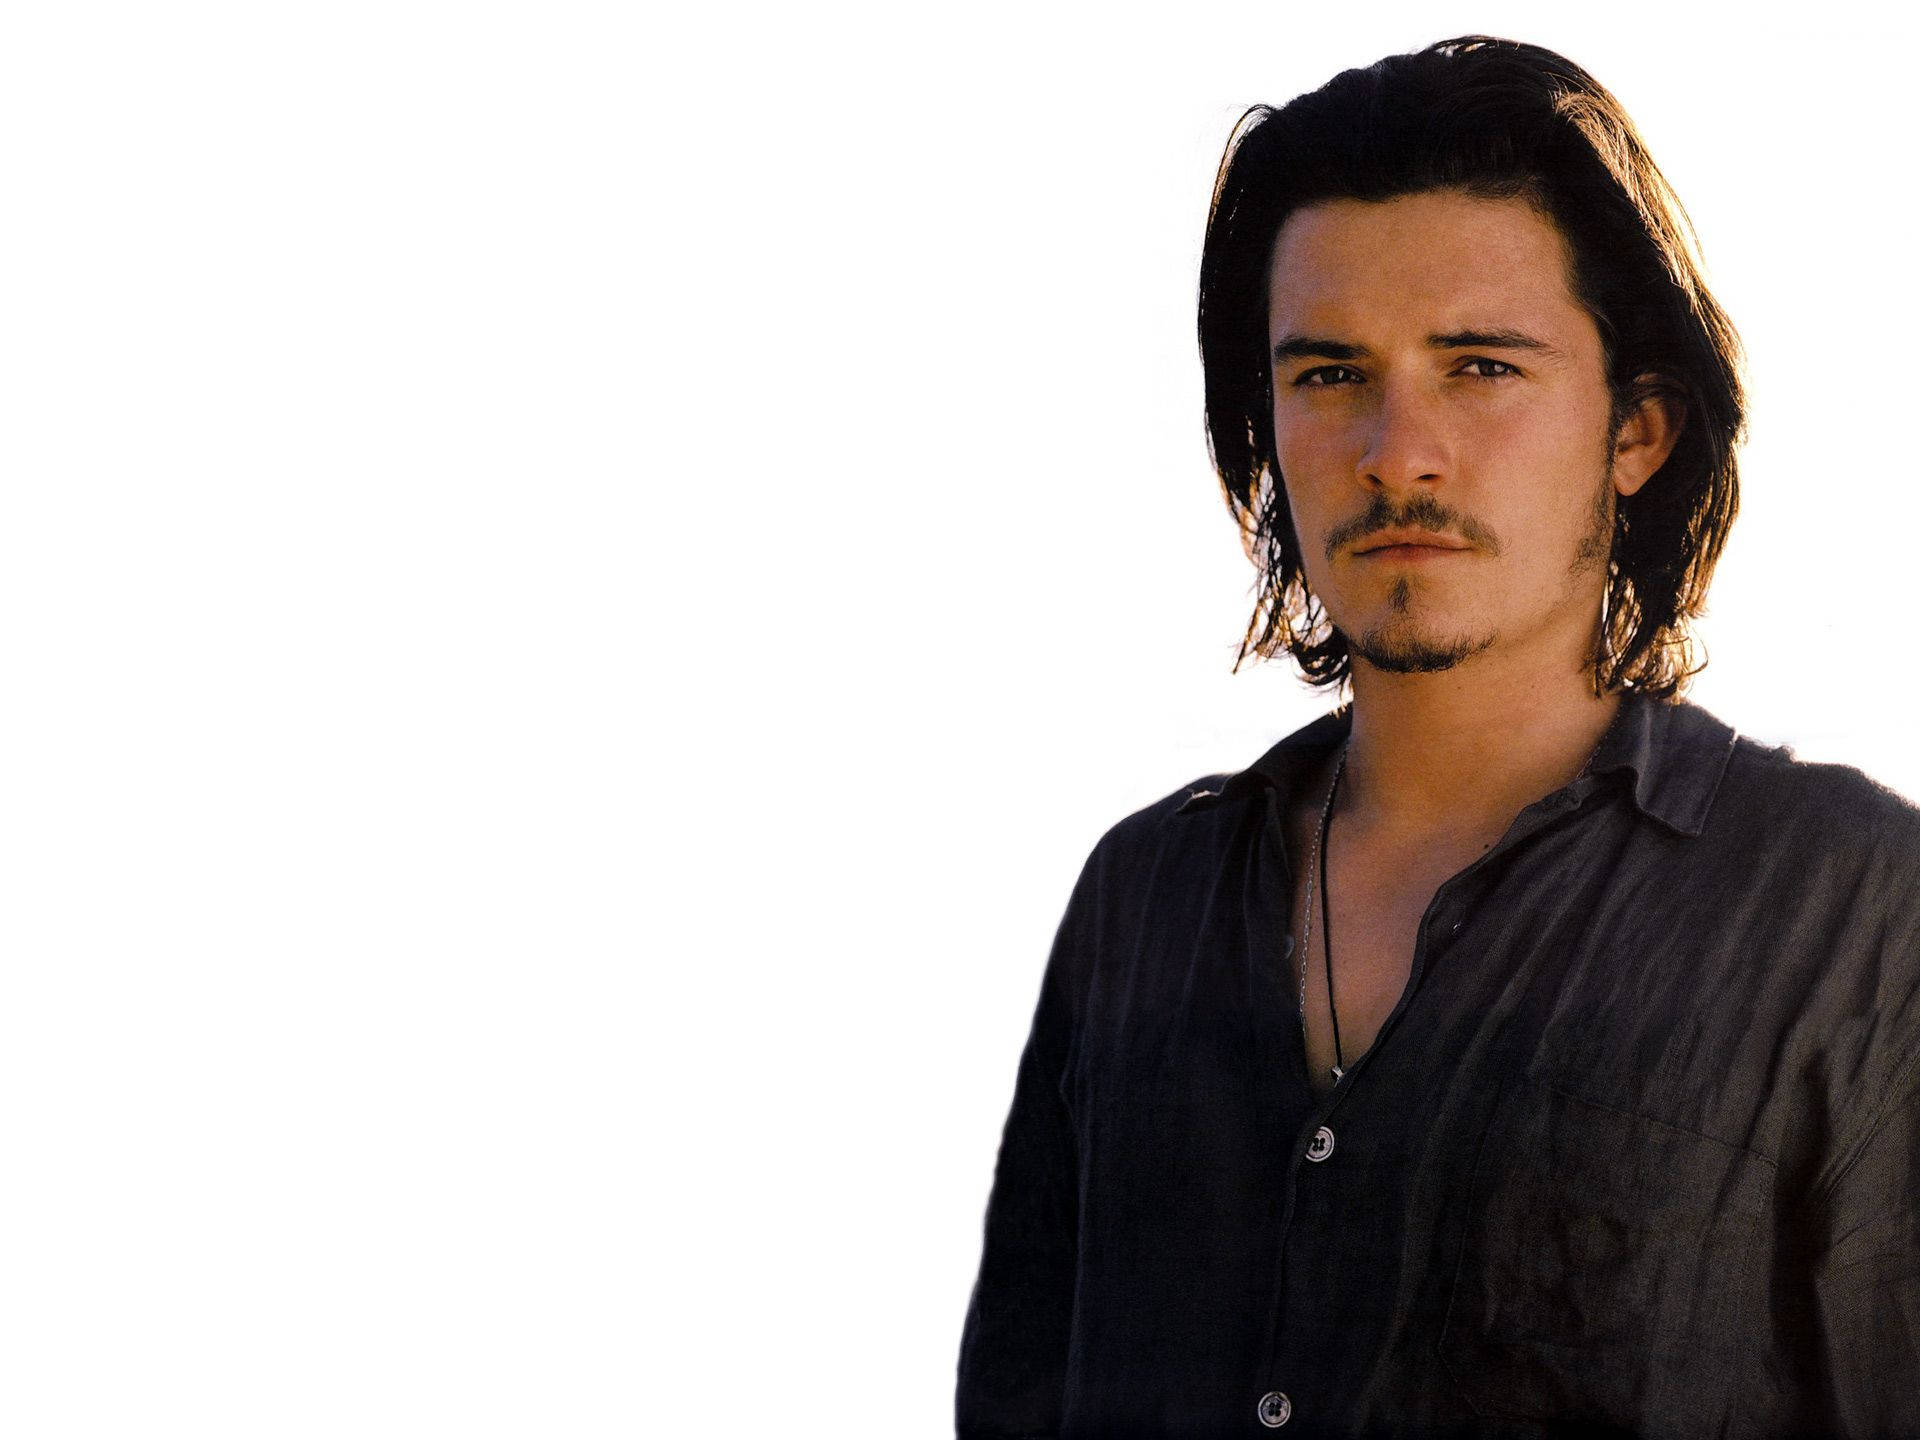 Free Orlando Bloom Wallpaper Downloads, [100+] Orlando Bloom Wallpapers for  FREE 